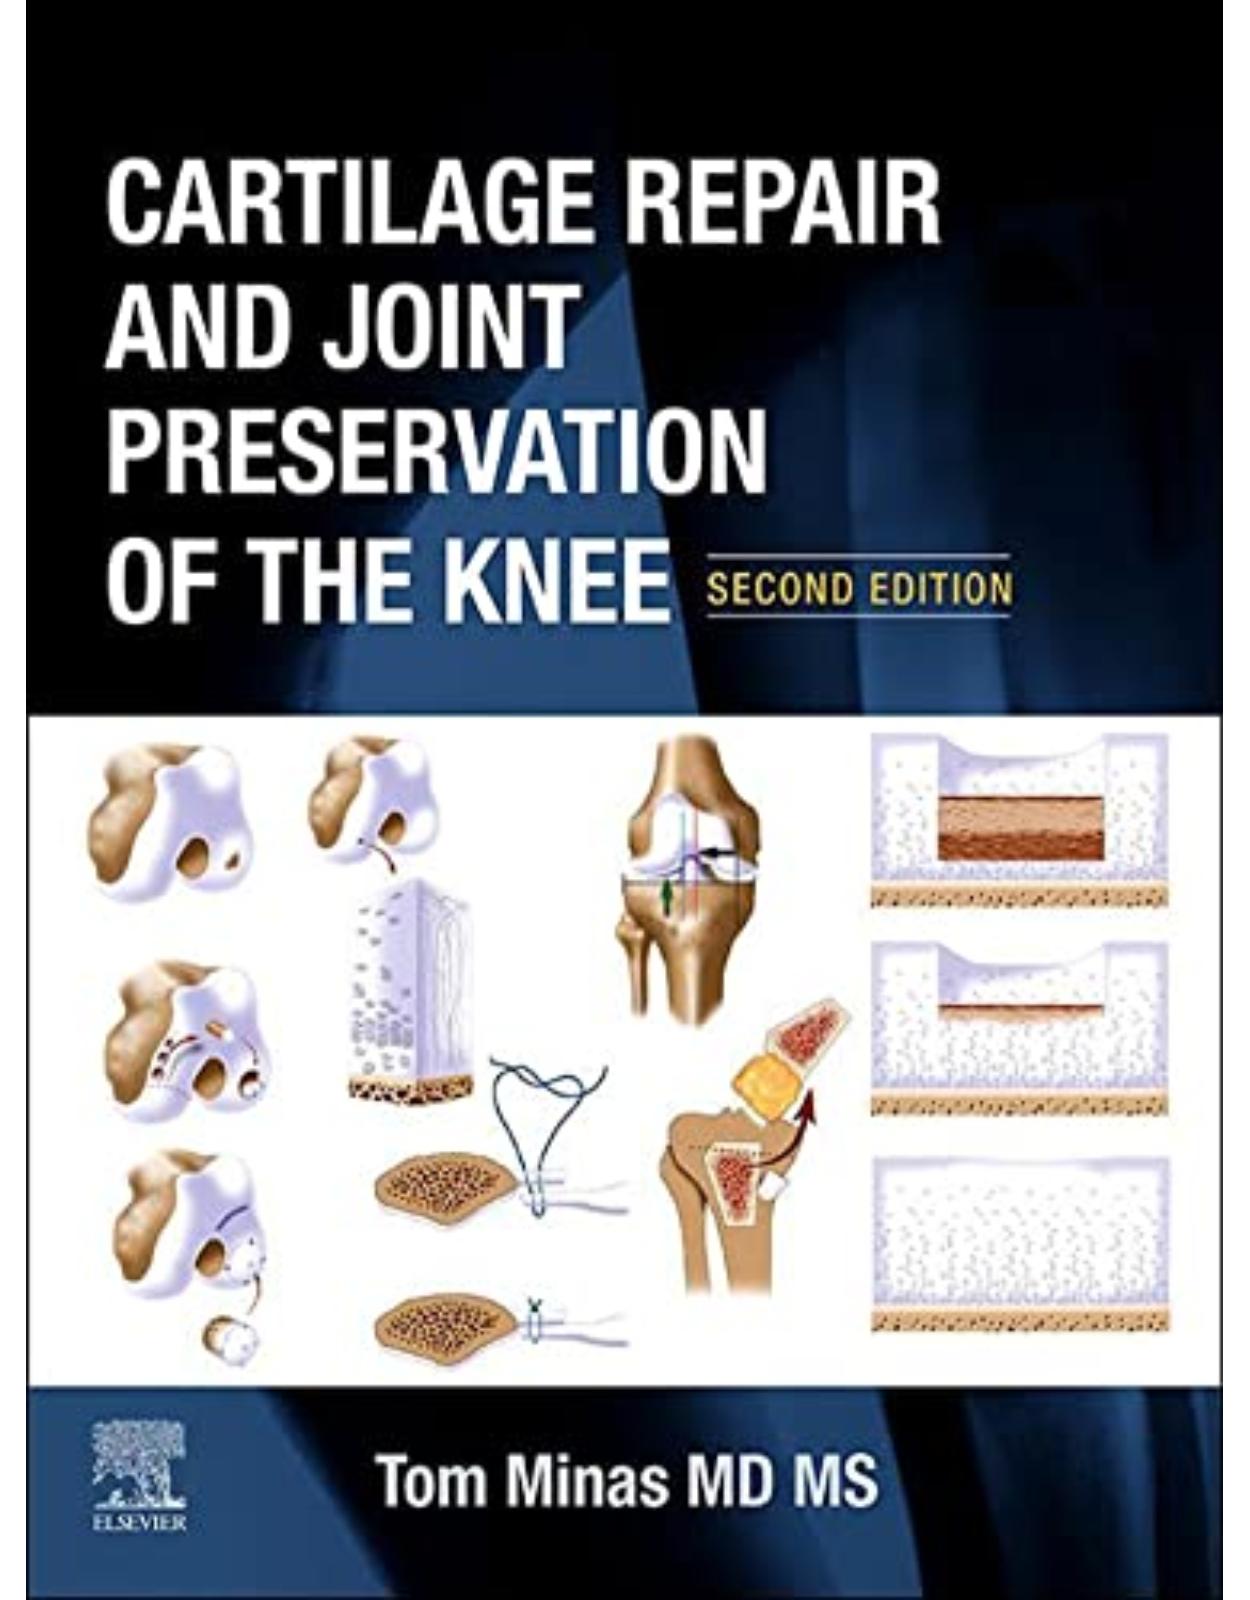 Cartilage Repair and Joint Preservation of the Knee, 2nd Edition